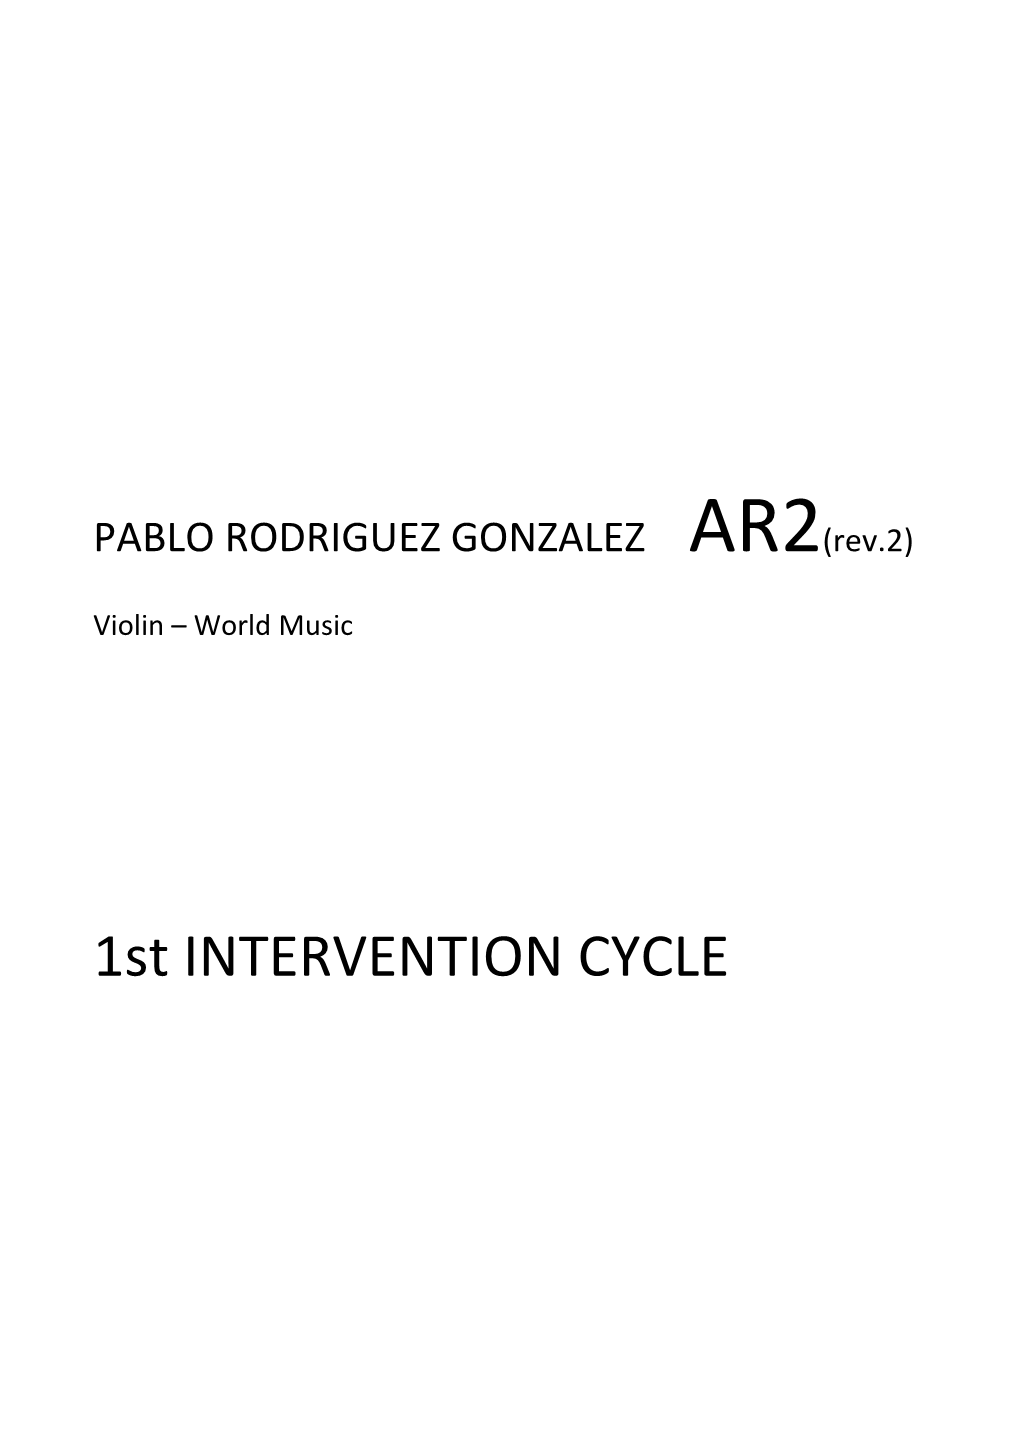 1St INTERVENTION CYCLE